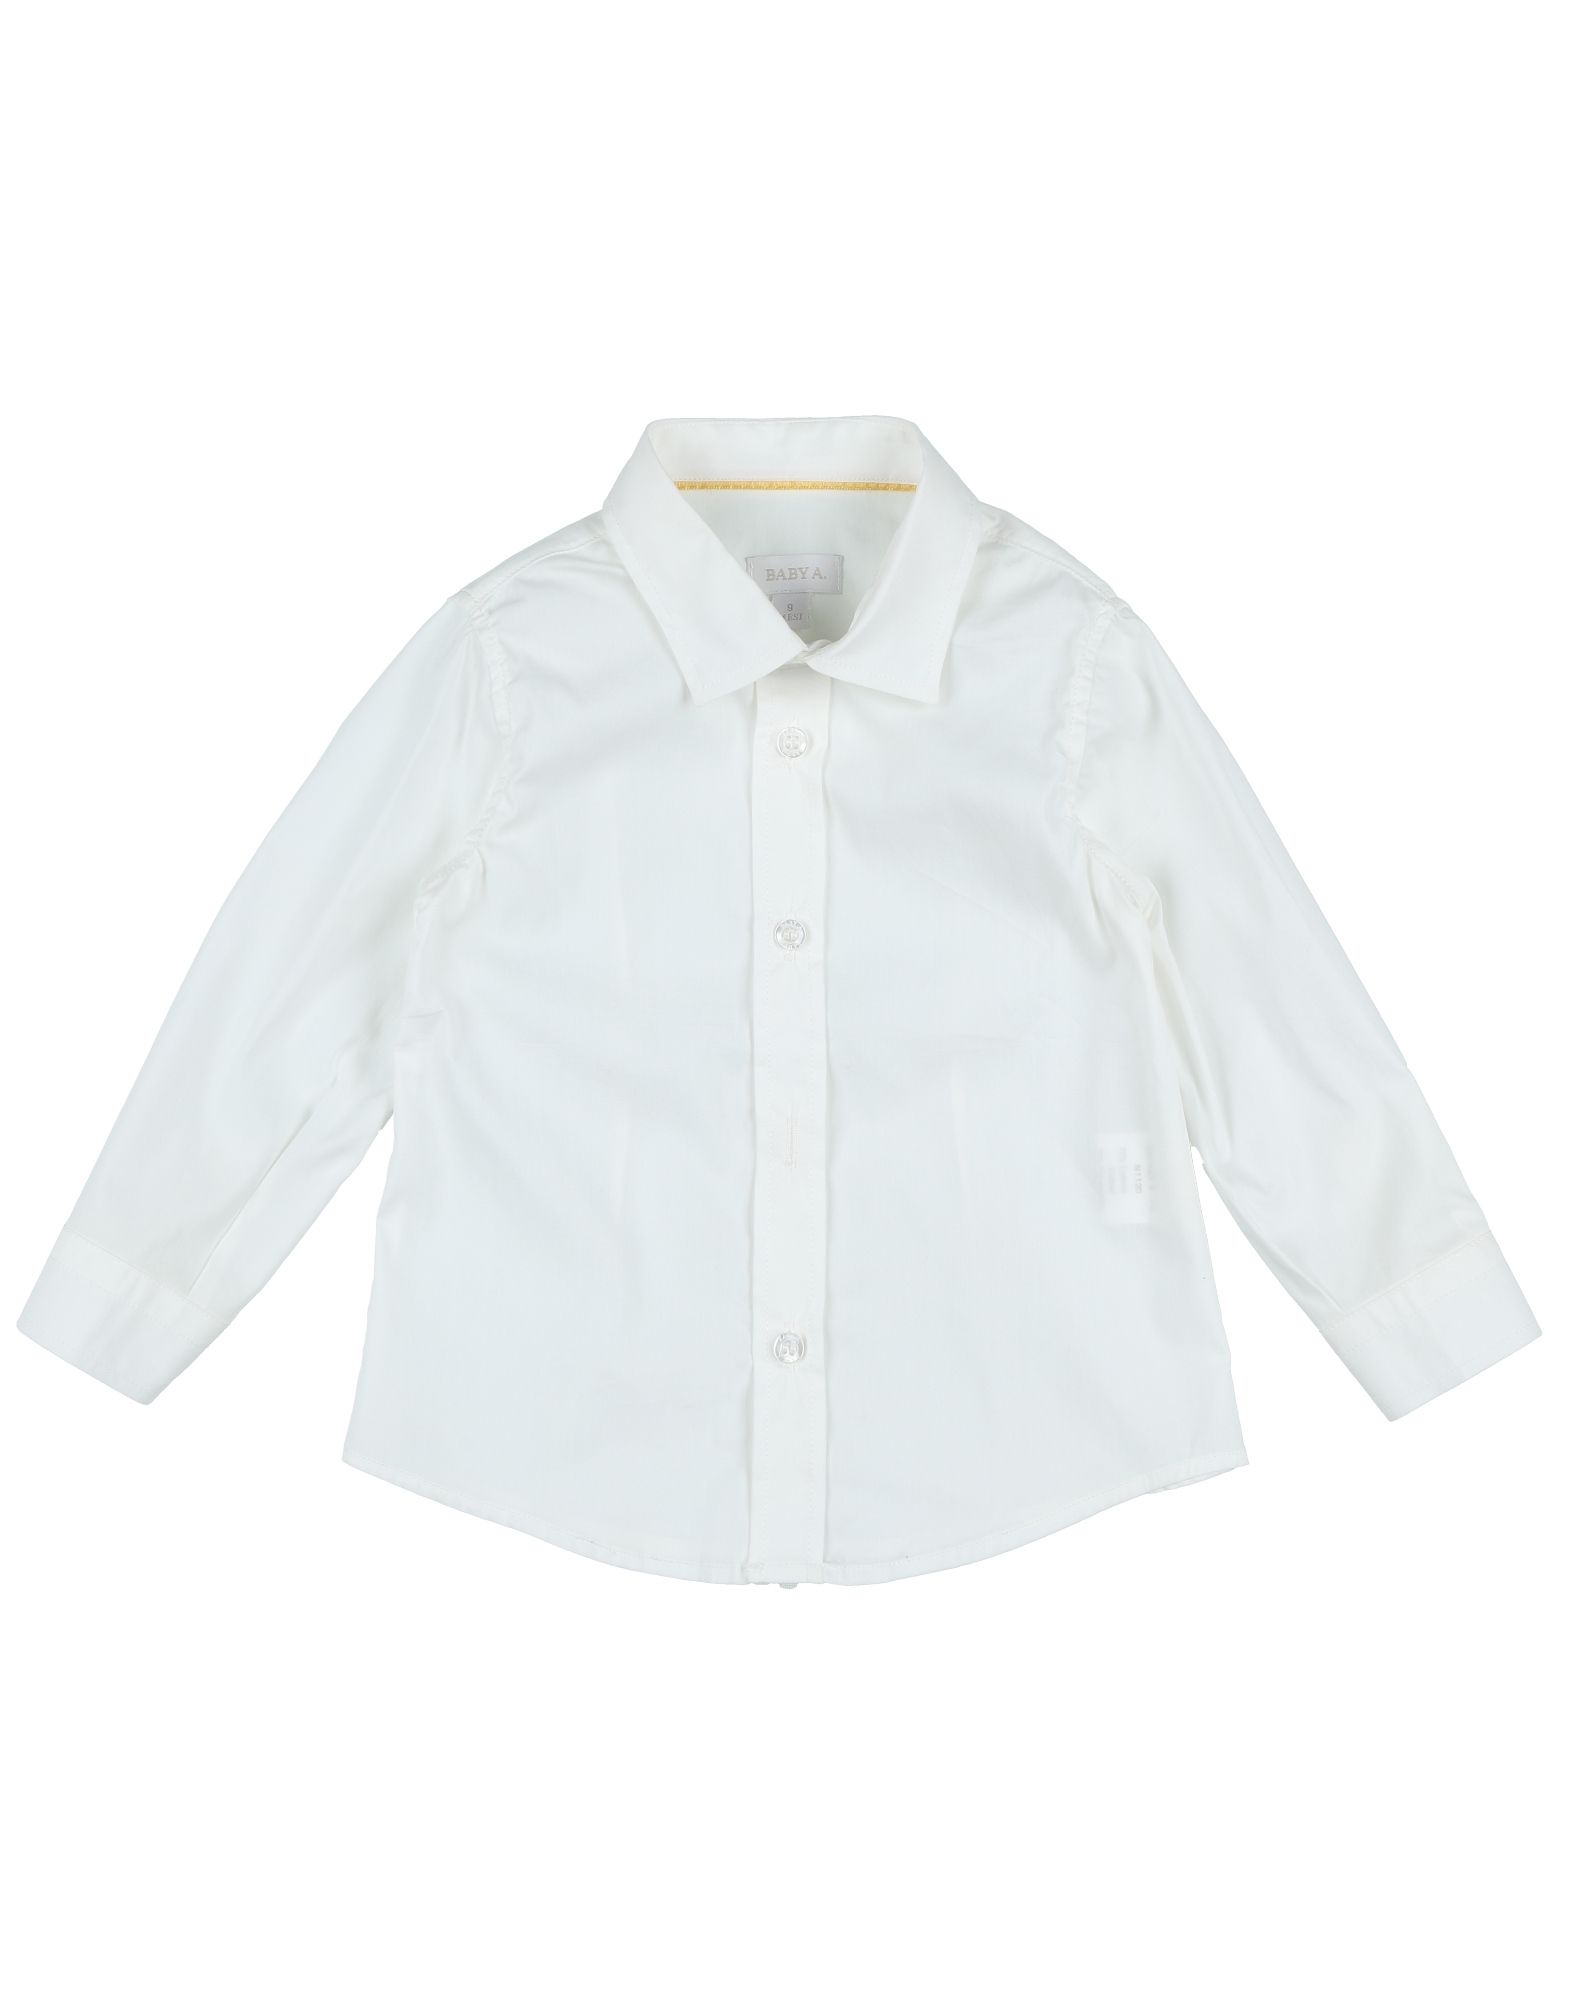 BABY A. Solid color shirt